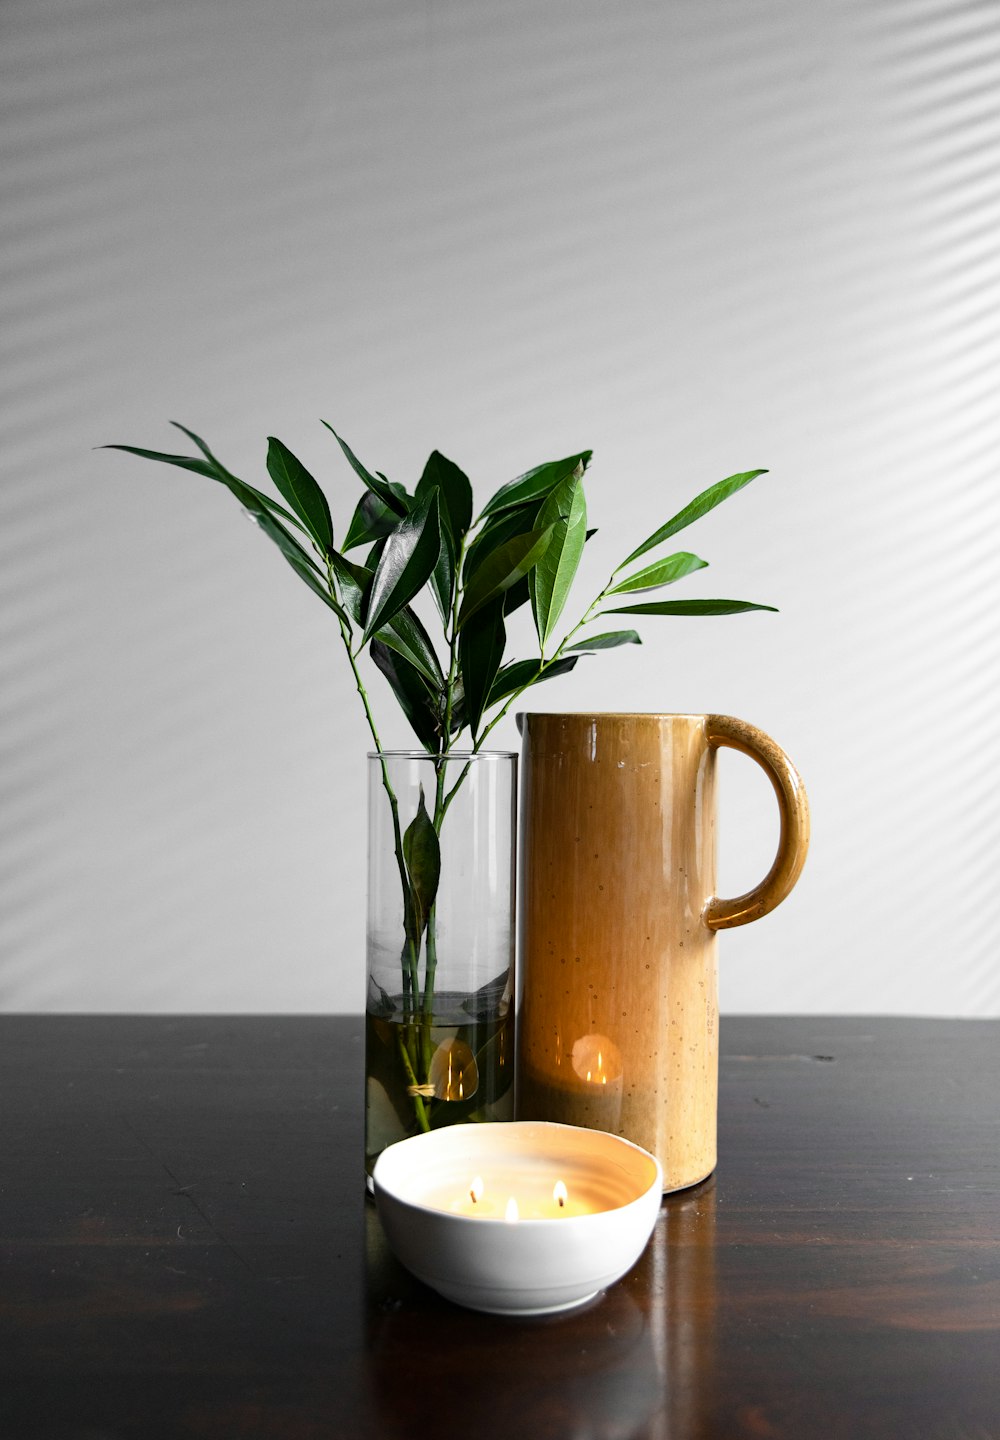 brown pitcher beside plant in vase